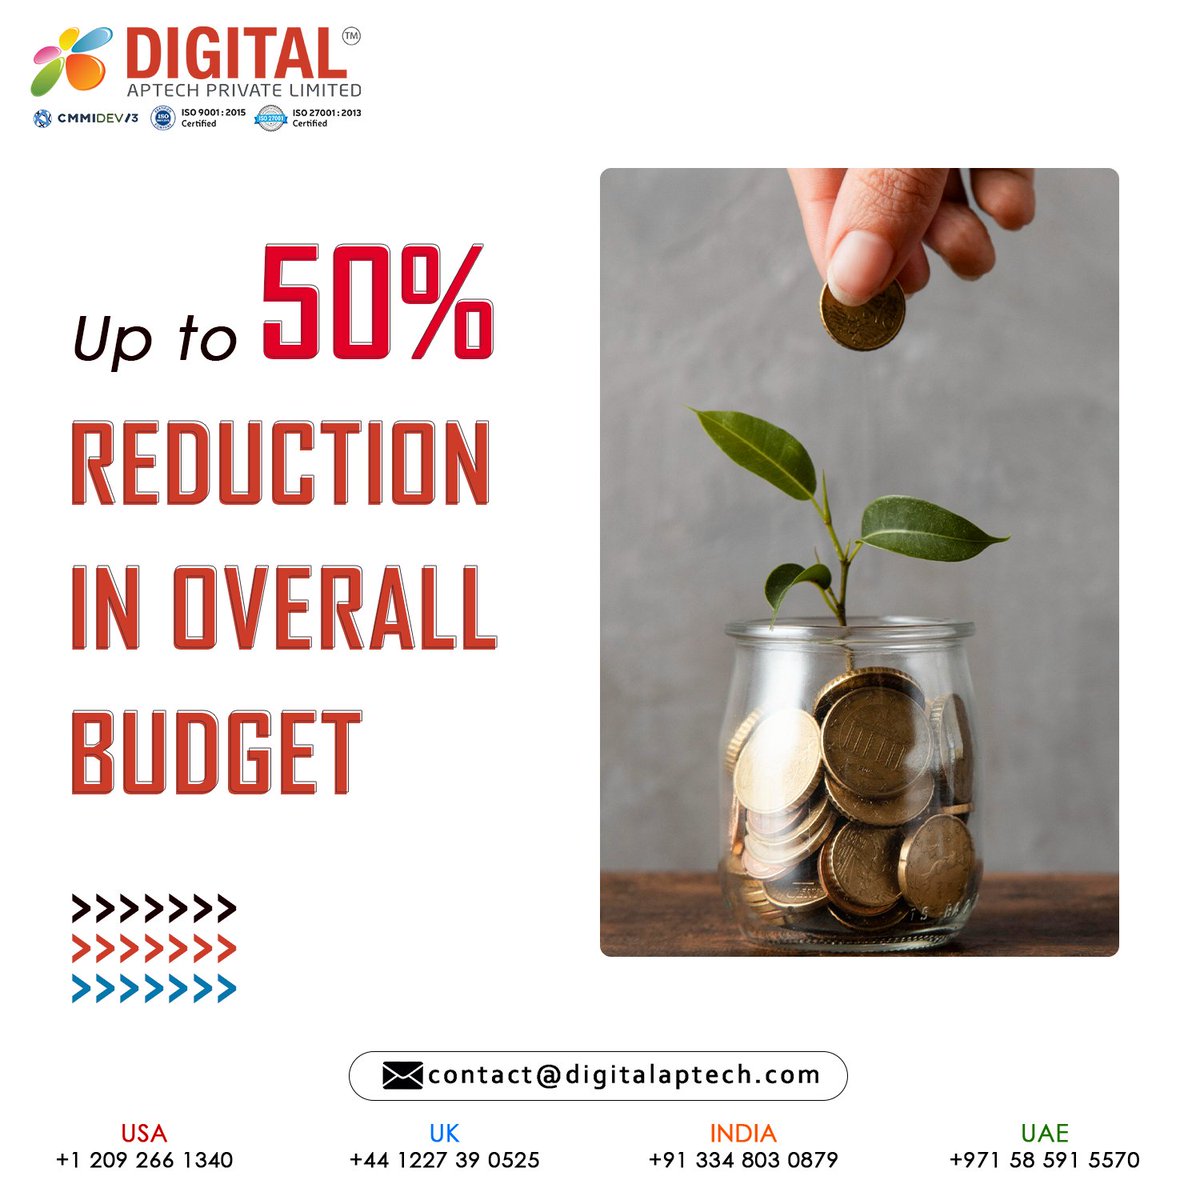 Choosing the Dedicated Resource Model can enable you to get a better better emote resources for a lower budget. Visit digitalaptech.com/dedicated-reso… to know the details.#DigitalAptech #dedicatedresourcemodel #ITStaffAugmentation #ClutchGlobal #ClutchChampion #top1000companies